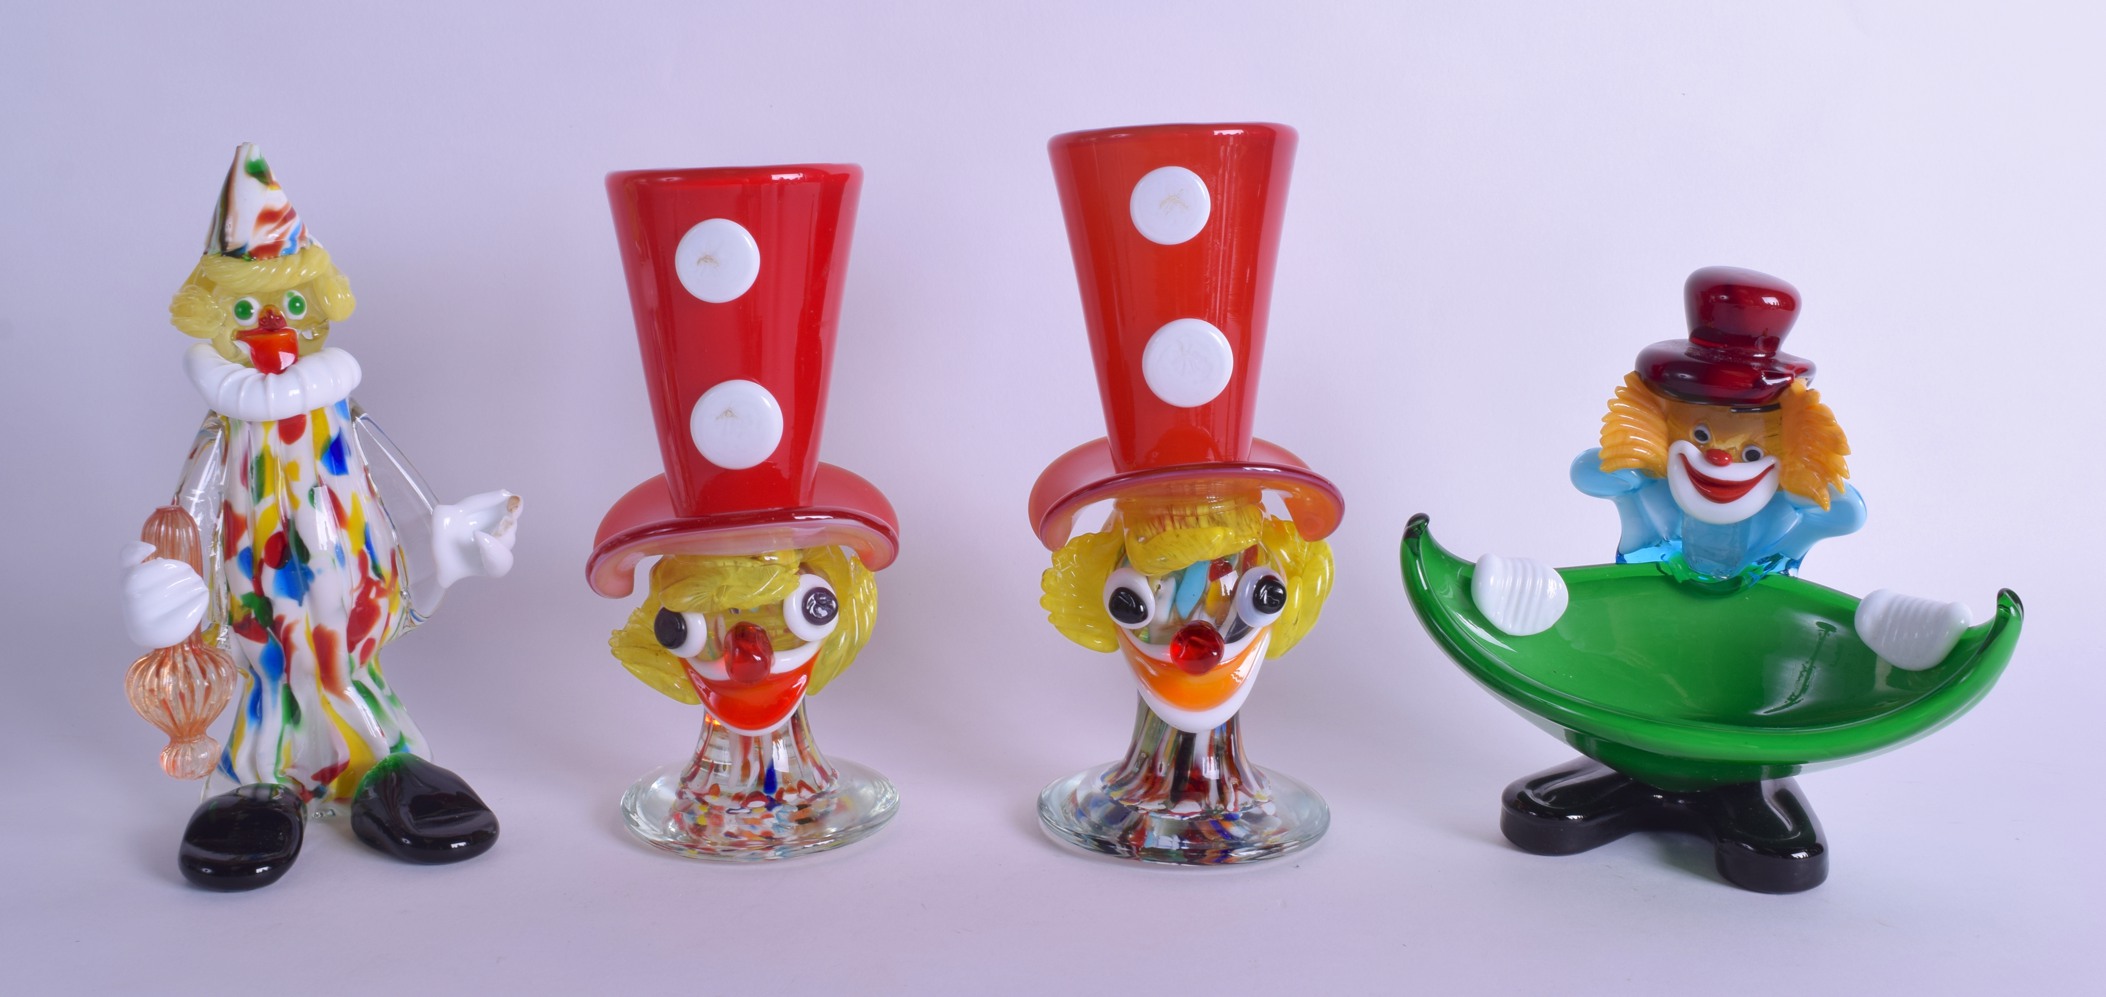 A PAIR OF MURANO GLASS CLOWN VASES together with two other figures. Largest 20 cm high. (4)